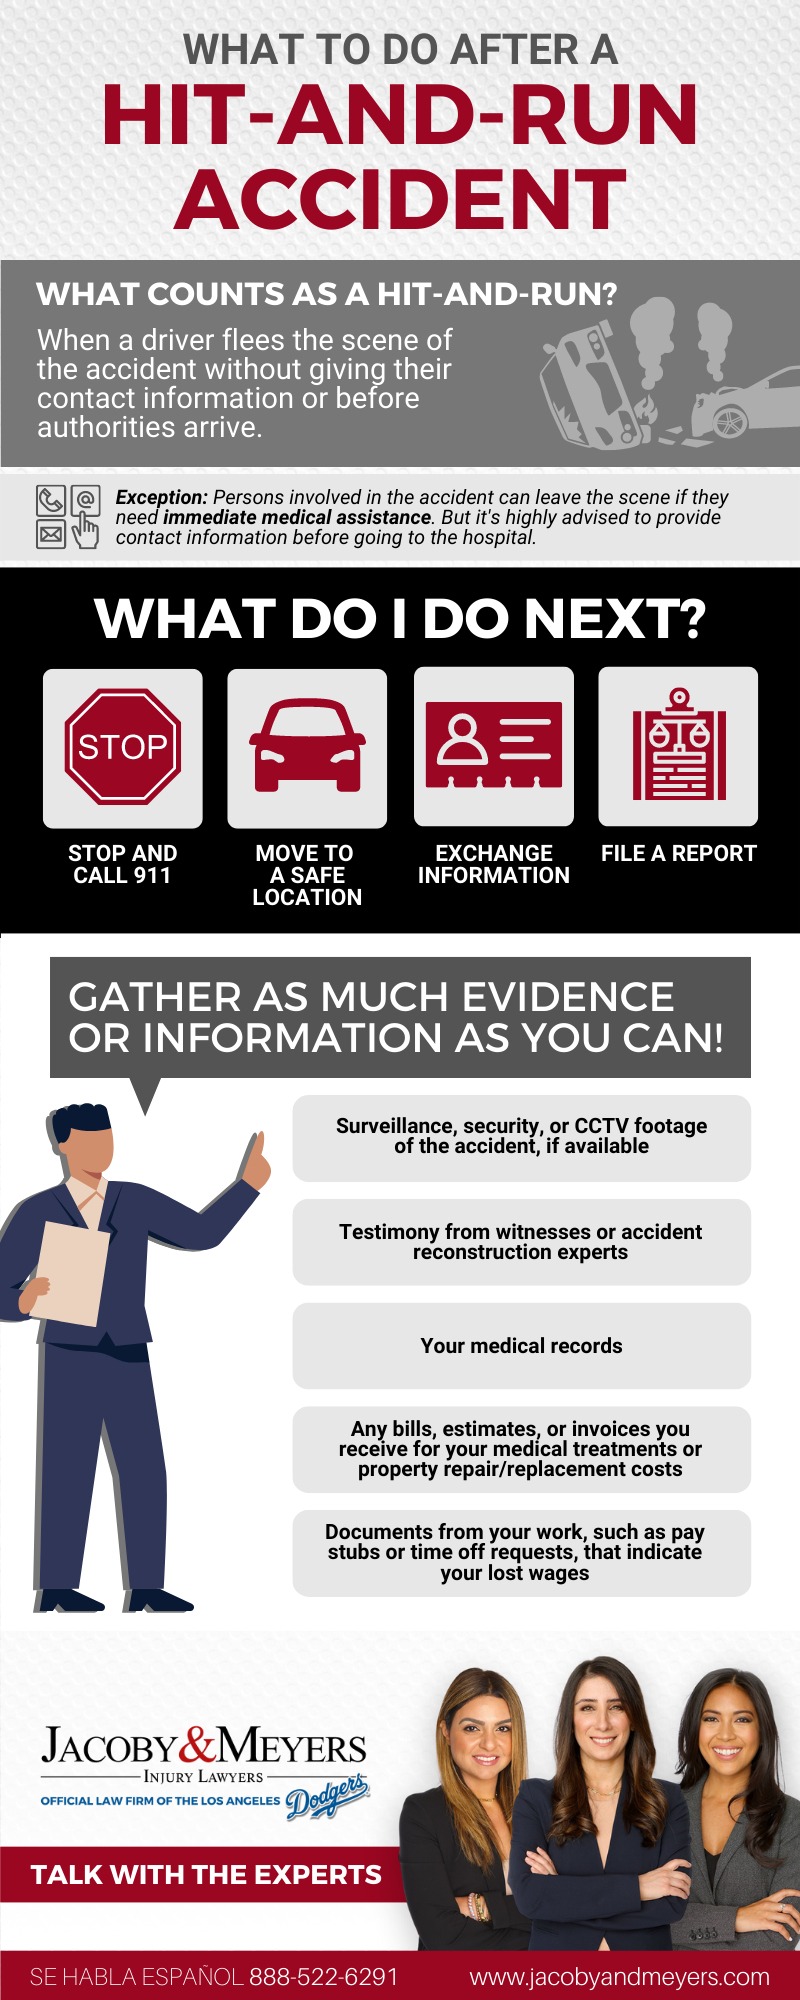 What to do after a hit-and-run accident infographic